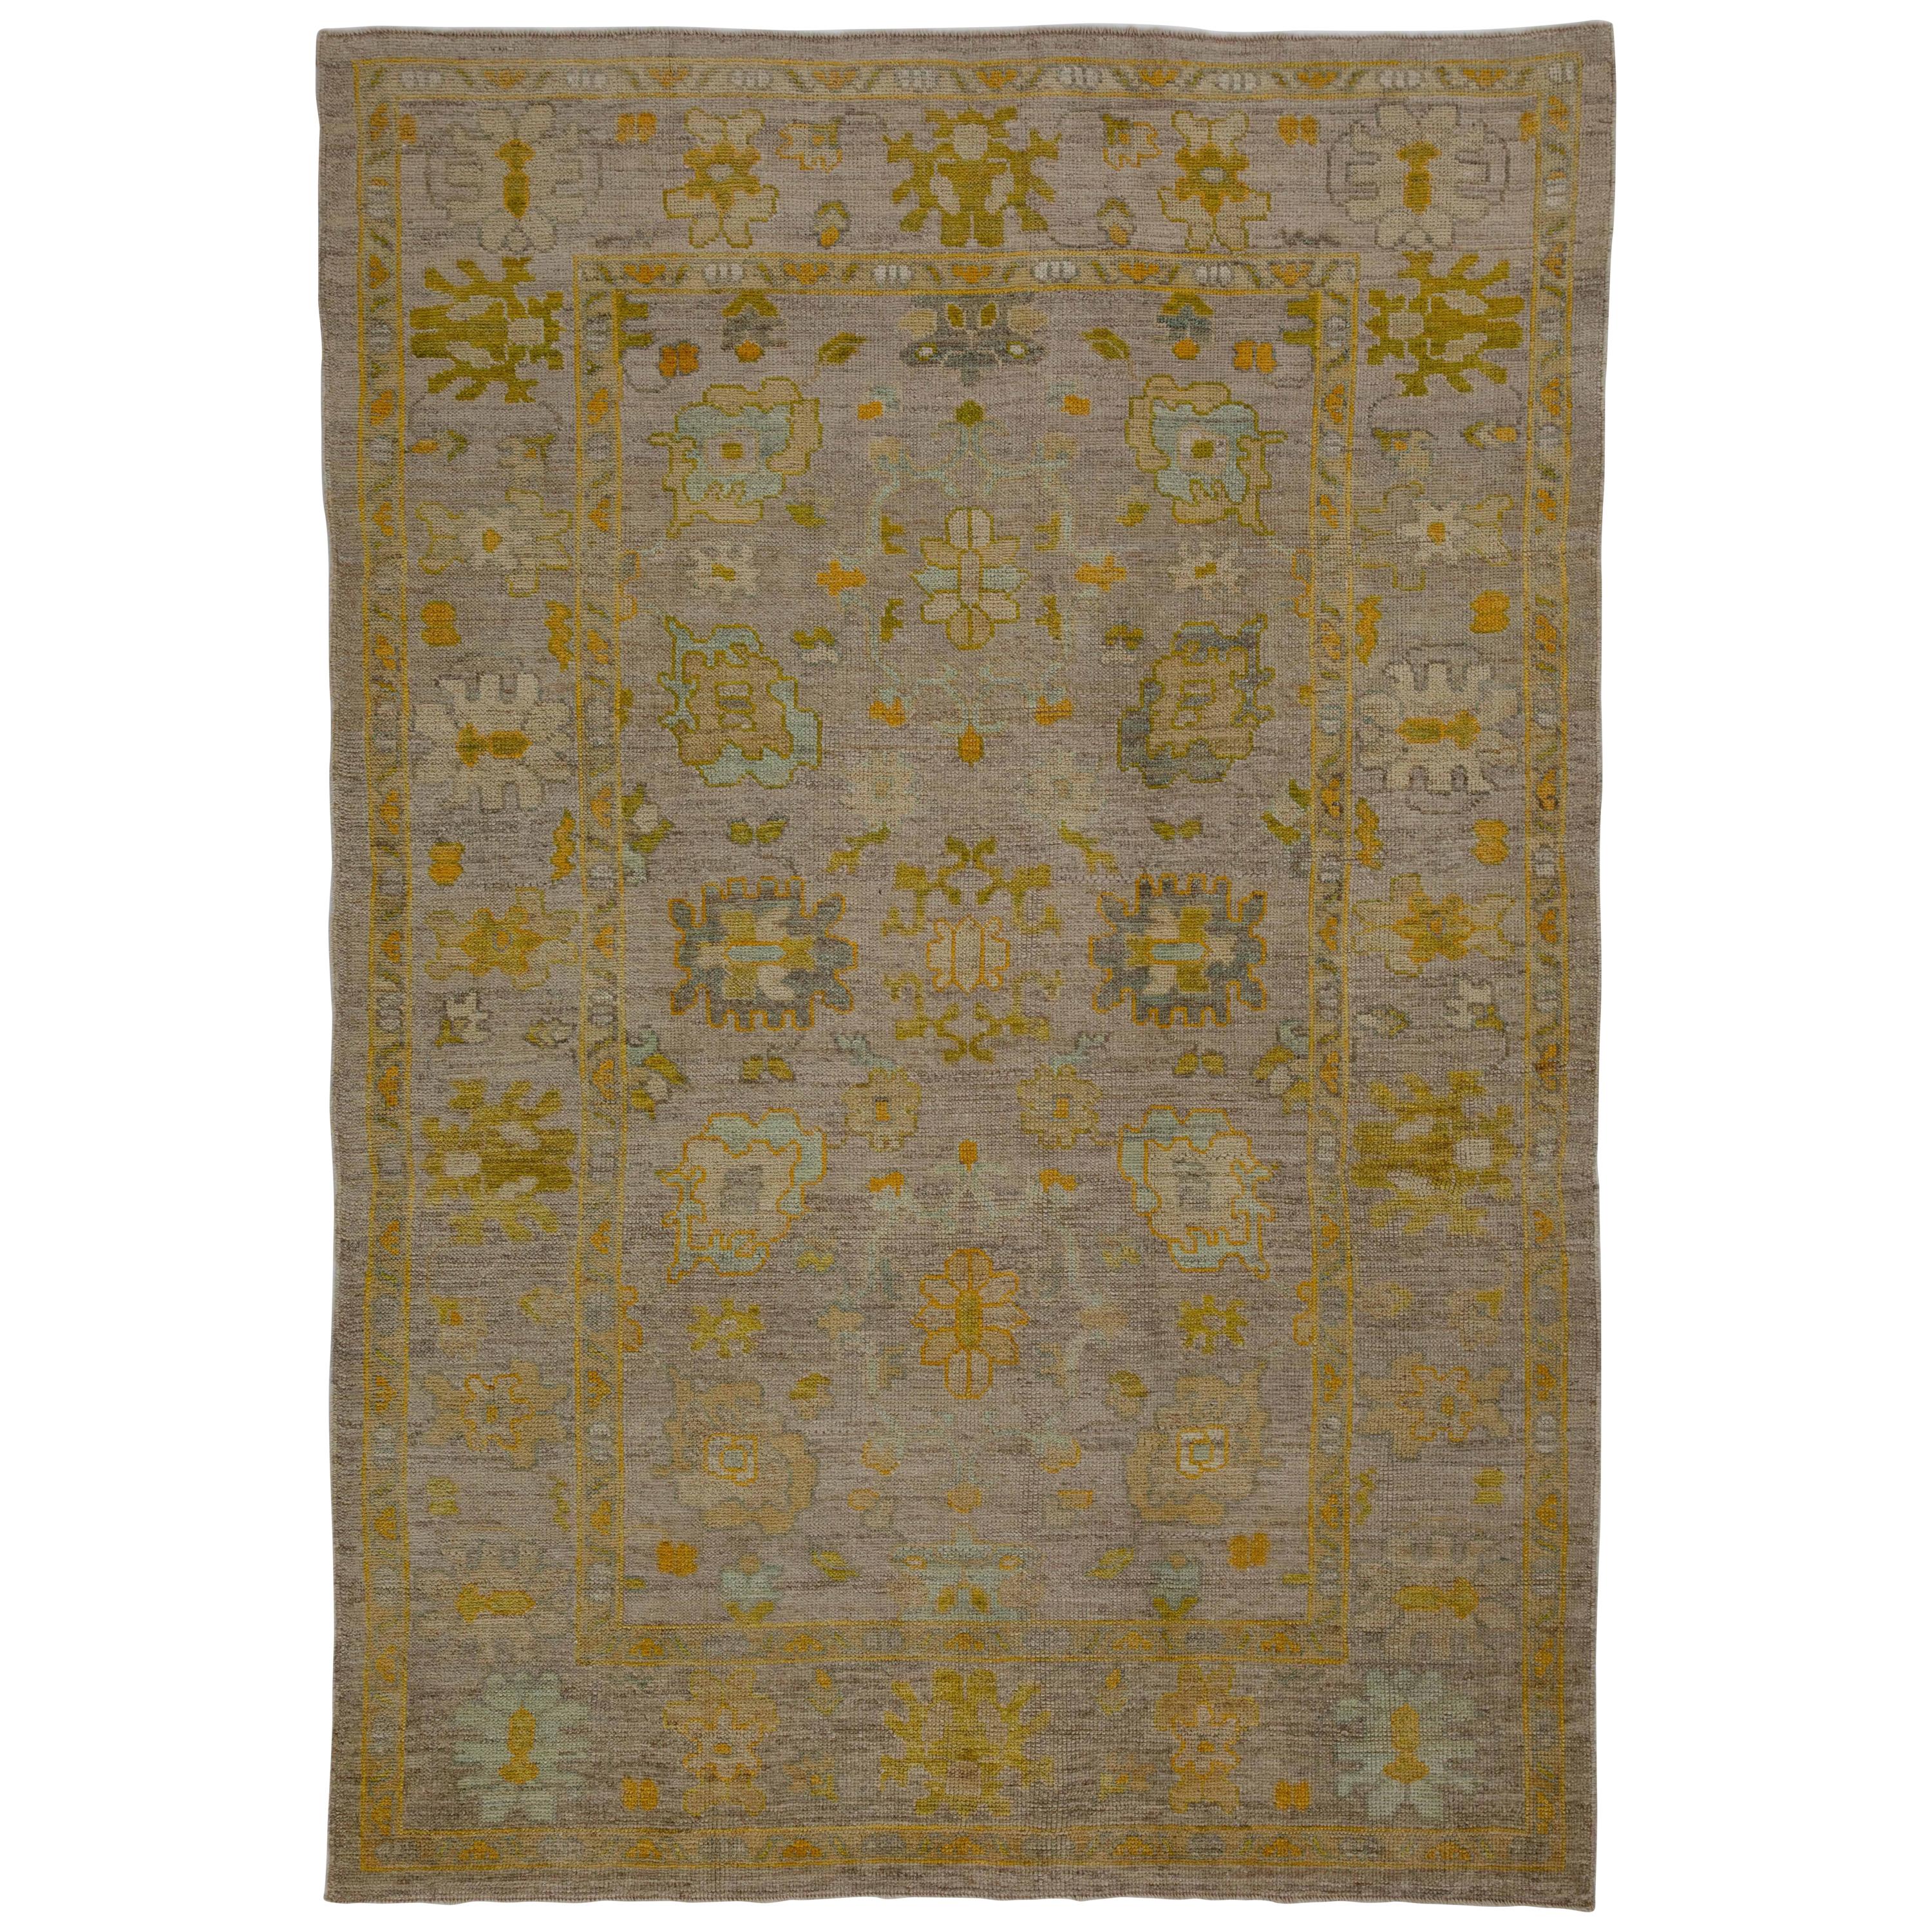 Contemporary Turkish Rug Oushak Weave with Rustic Flower Patterns on Beige Field